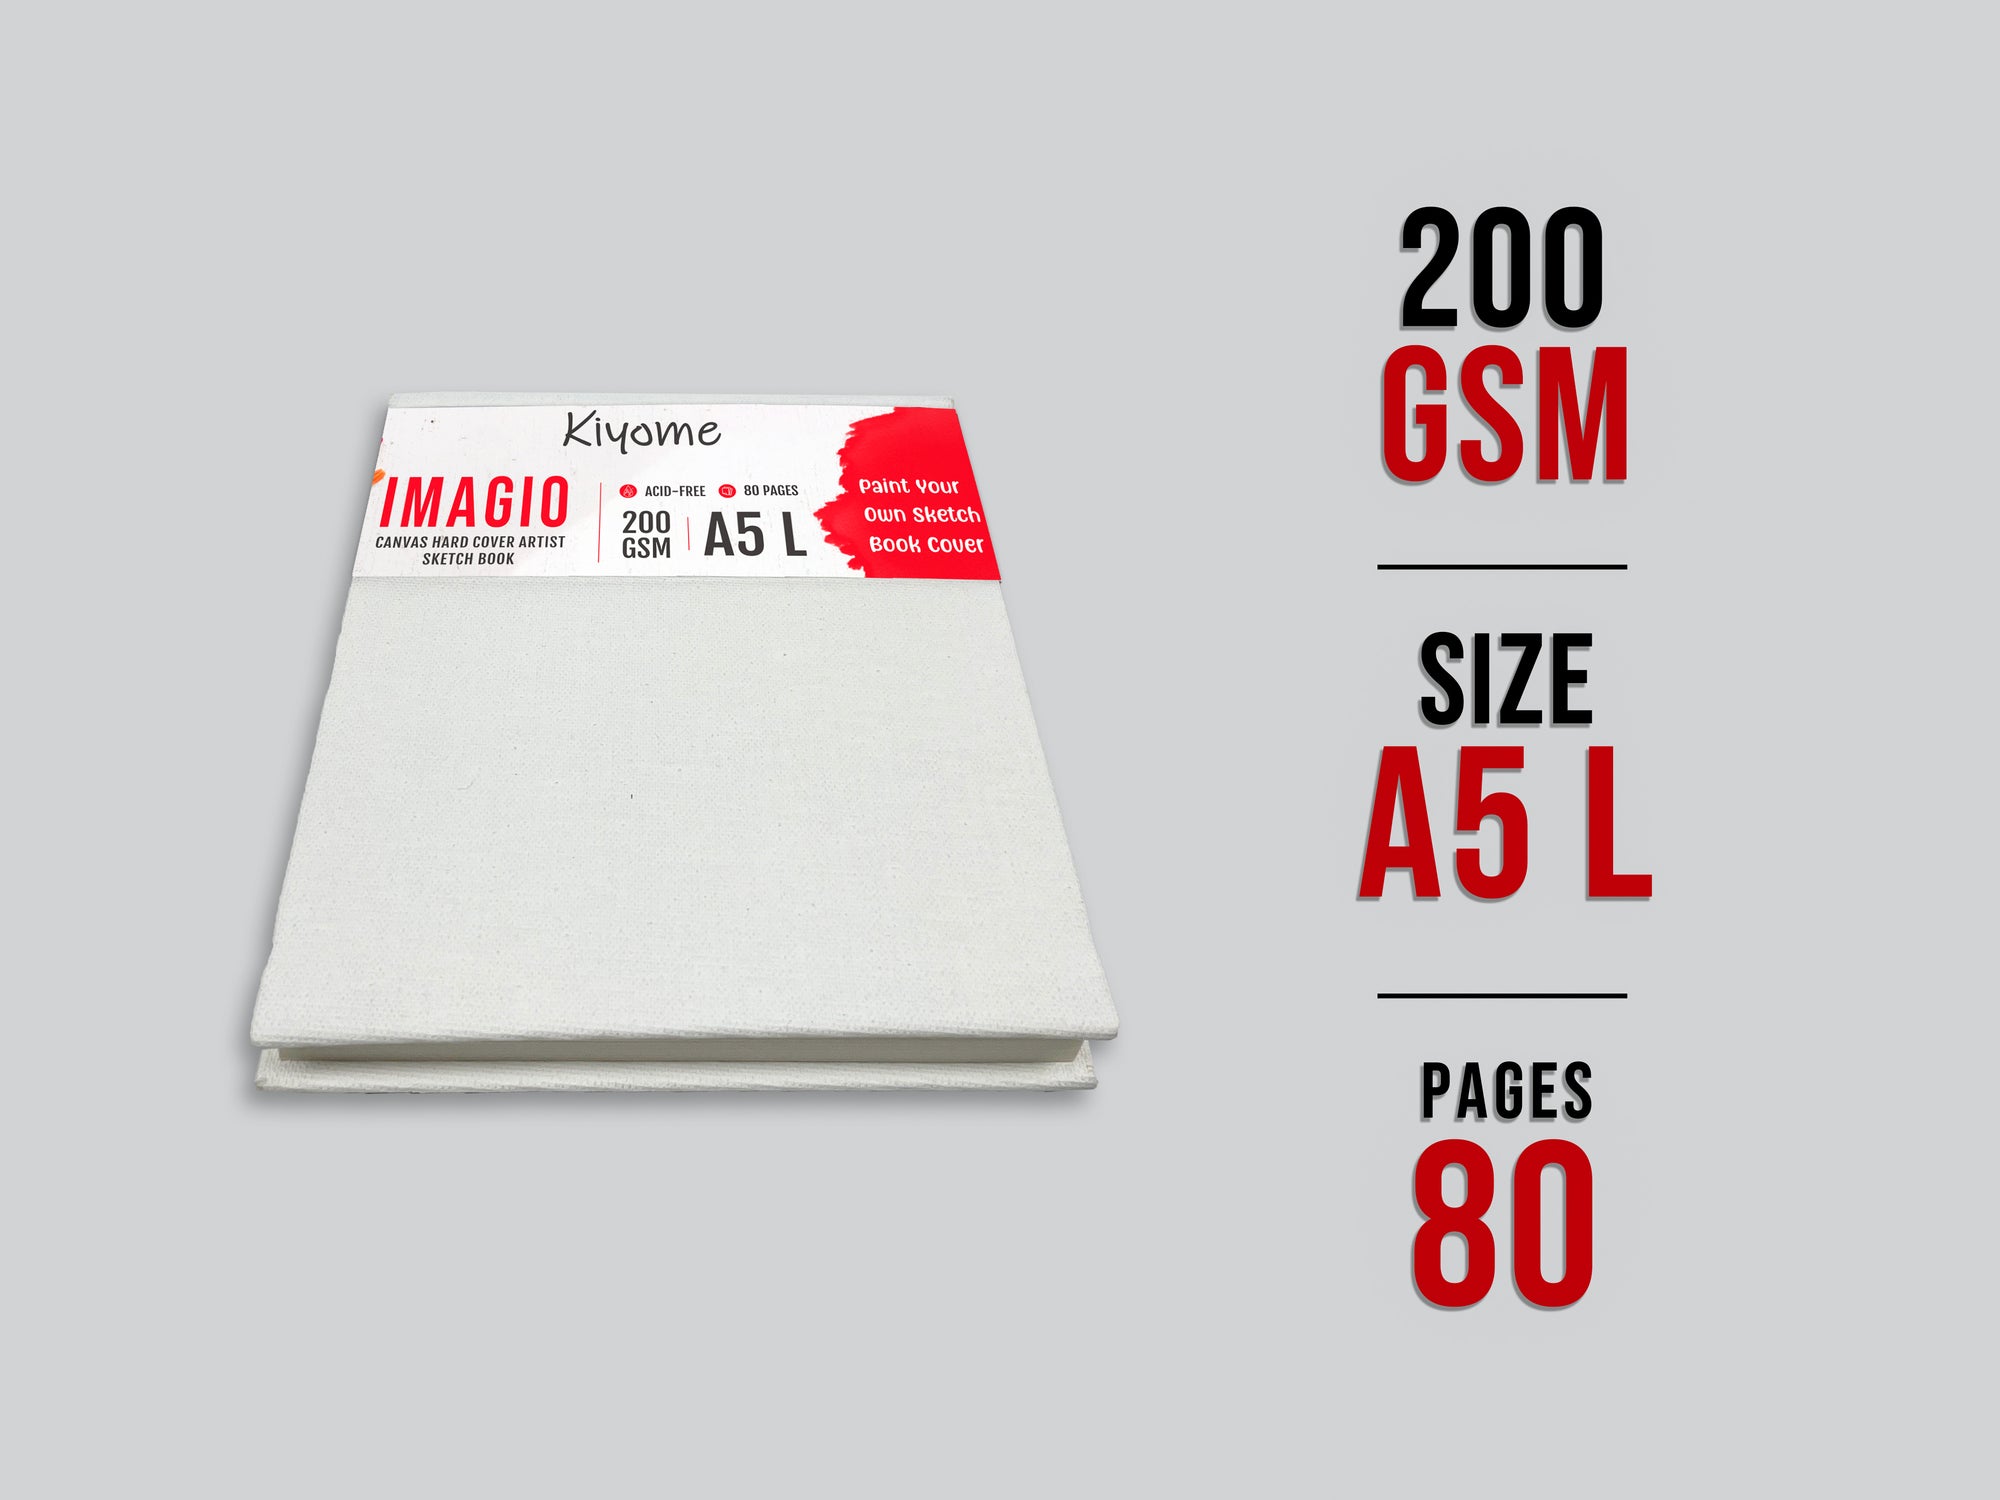 Kiyome Imagio Sketchbook | 200 GSM | A5L | Canvas Cover | 80 Sheets